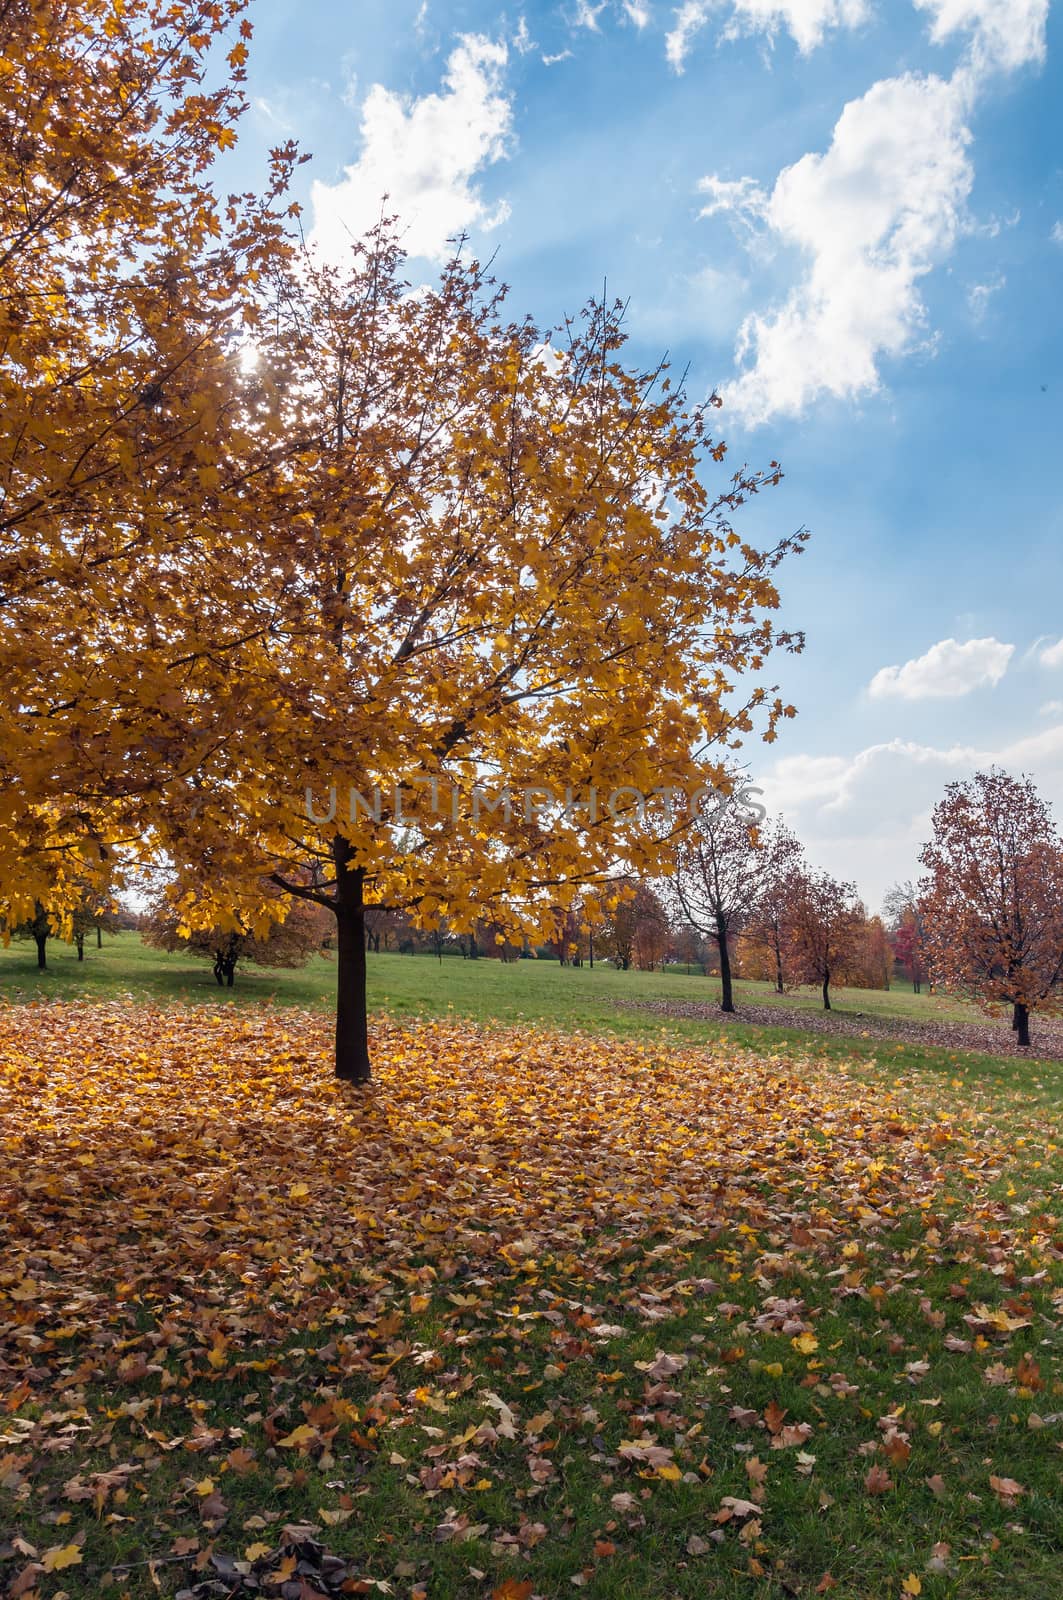 Autumn trees in a park by mkos83